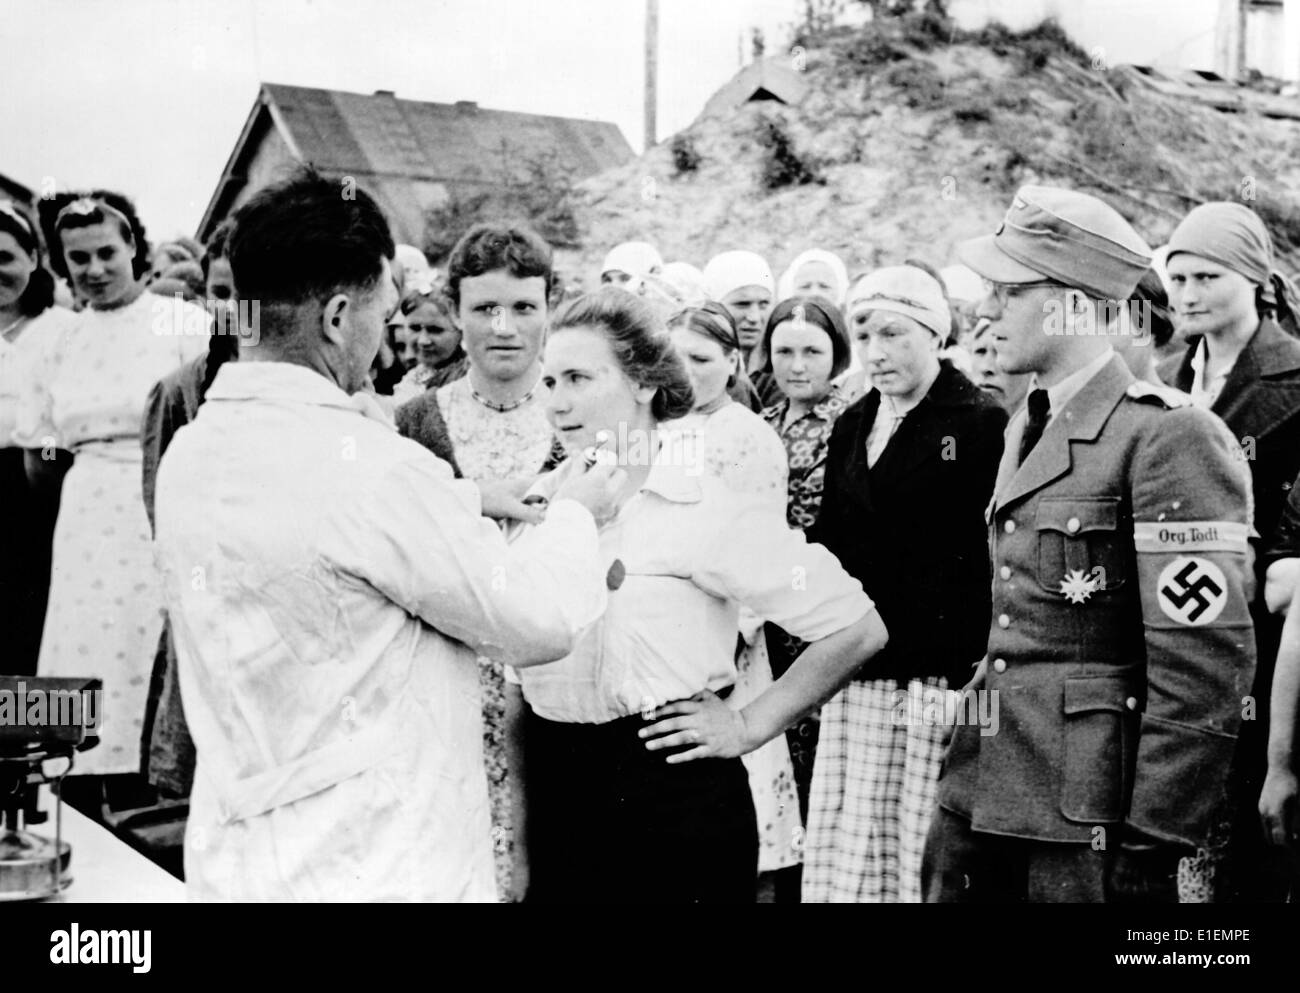 The Nazi news photo shows local woman from the areas of the Eastern Front occupied by the German army being vaccinated before their work in the Todt Organization in October 1943, location unknown. A translation of the original Nazi propaganda in German reads: Healthcare in the East. Local volunteers for service in the Todt Organization are vaccinated against disease. Fotoarchiv für Zeitgeschichte - NO WIRE SERVICE Stock Photo